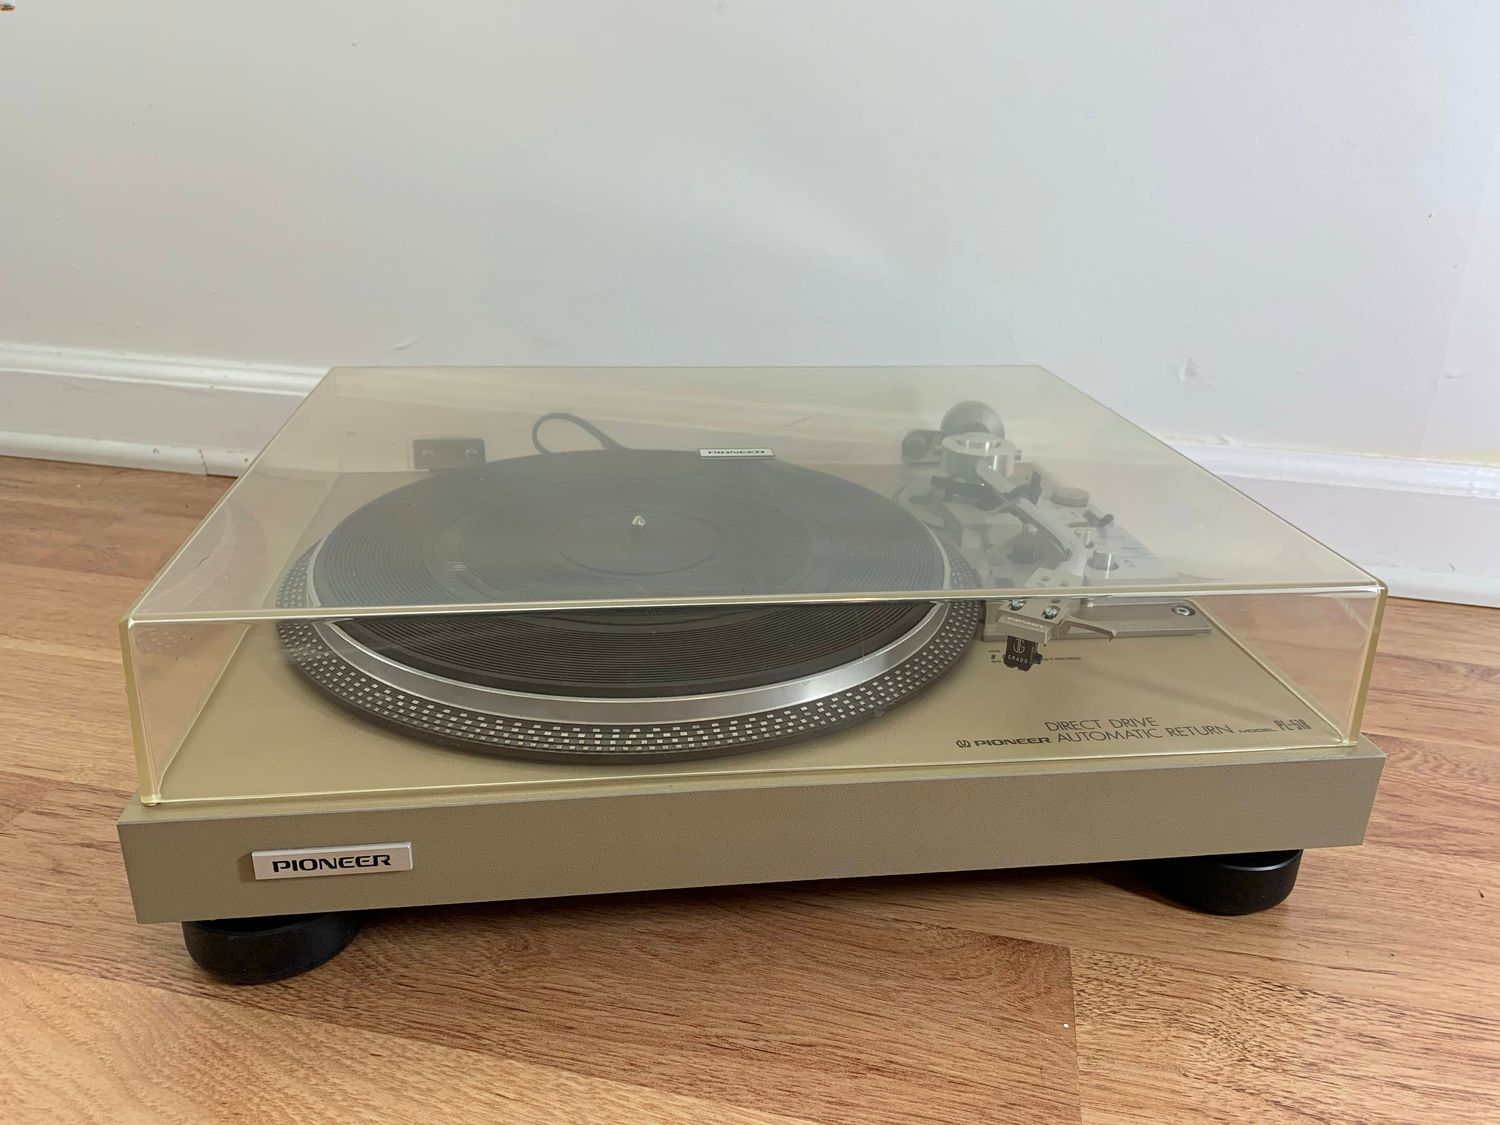 How Do I Make My Pioneer Pl-518 In To A Manual Turntable